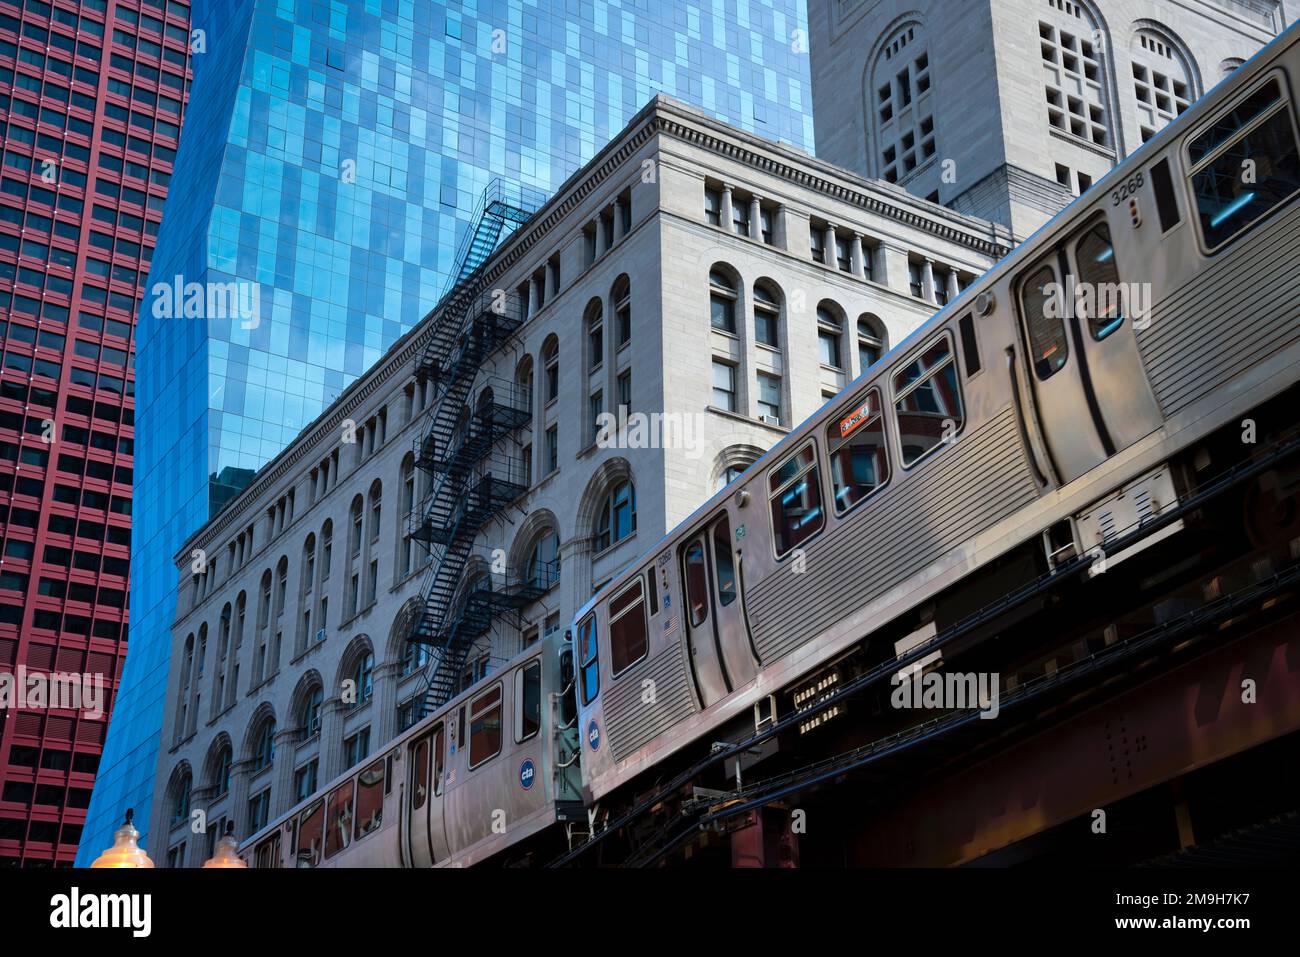 Elevated train passing buildings, Loop district, Chicago, Illinois, USA Stock Photo